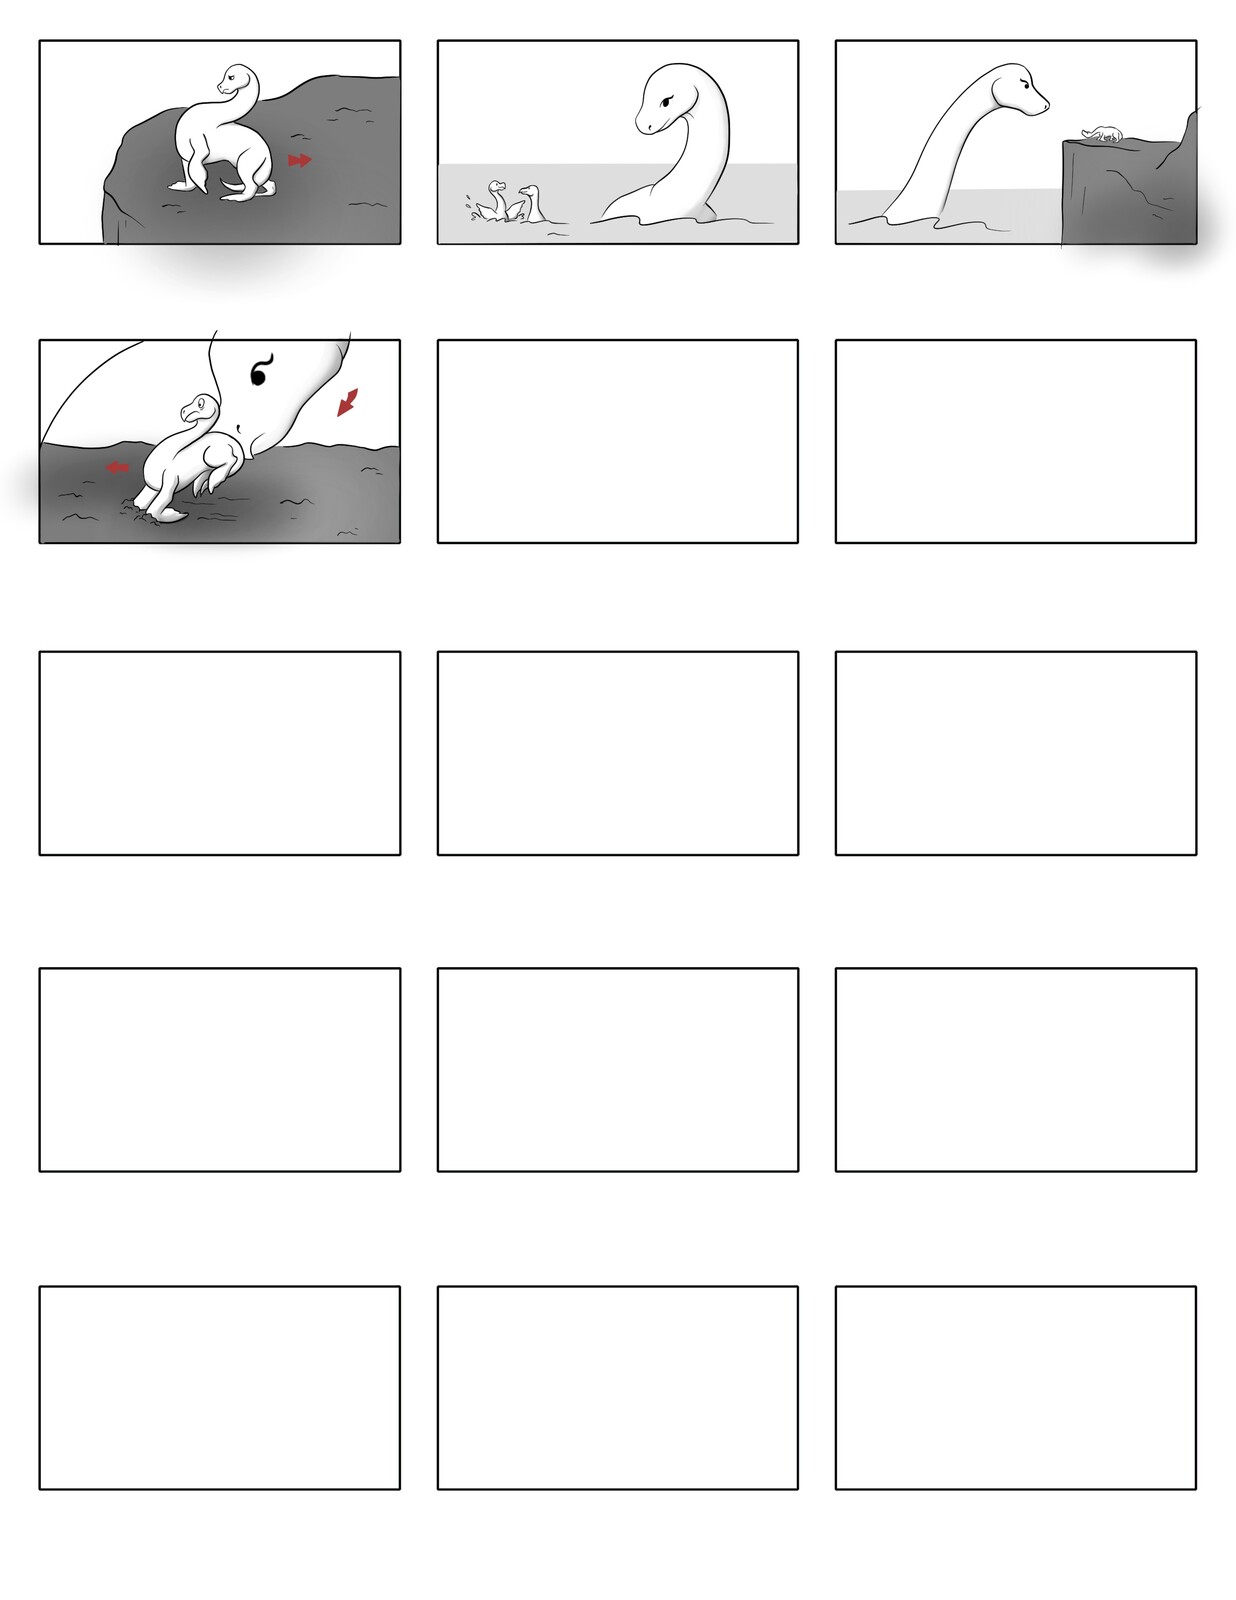 A few remastered Storyboard panels